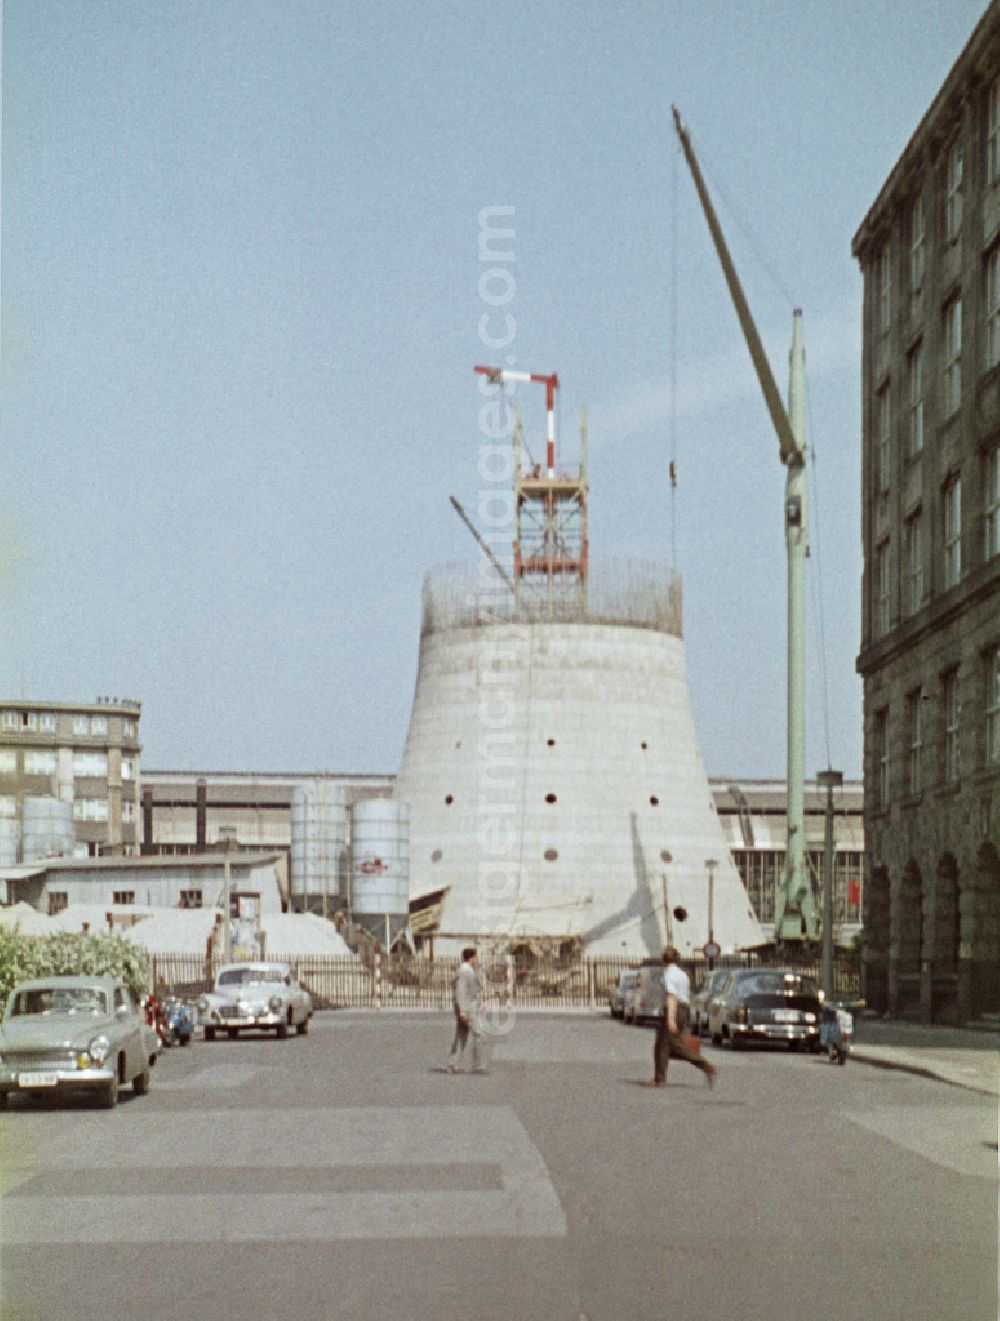 Berlin: Construction site for the new construction of the shaft of the prestige telecommunications tower building and television tower in the district of Mitte in Berlin East Berlin on the territory of the former GDR, German Democratic Republic